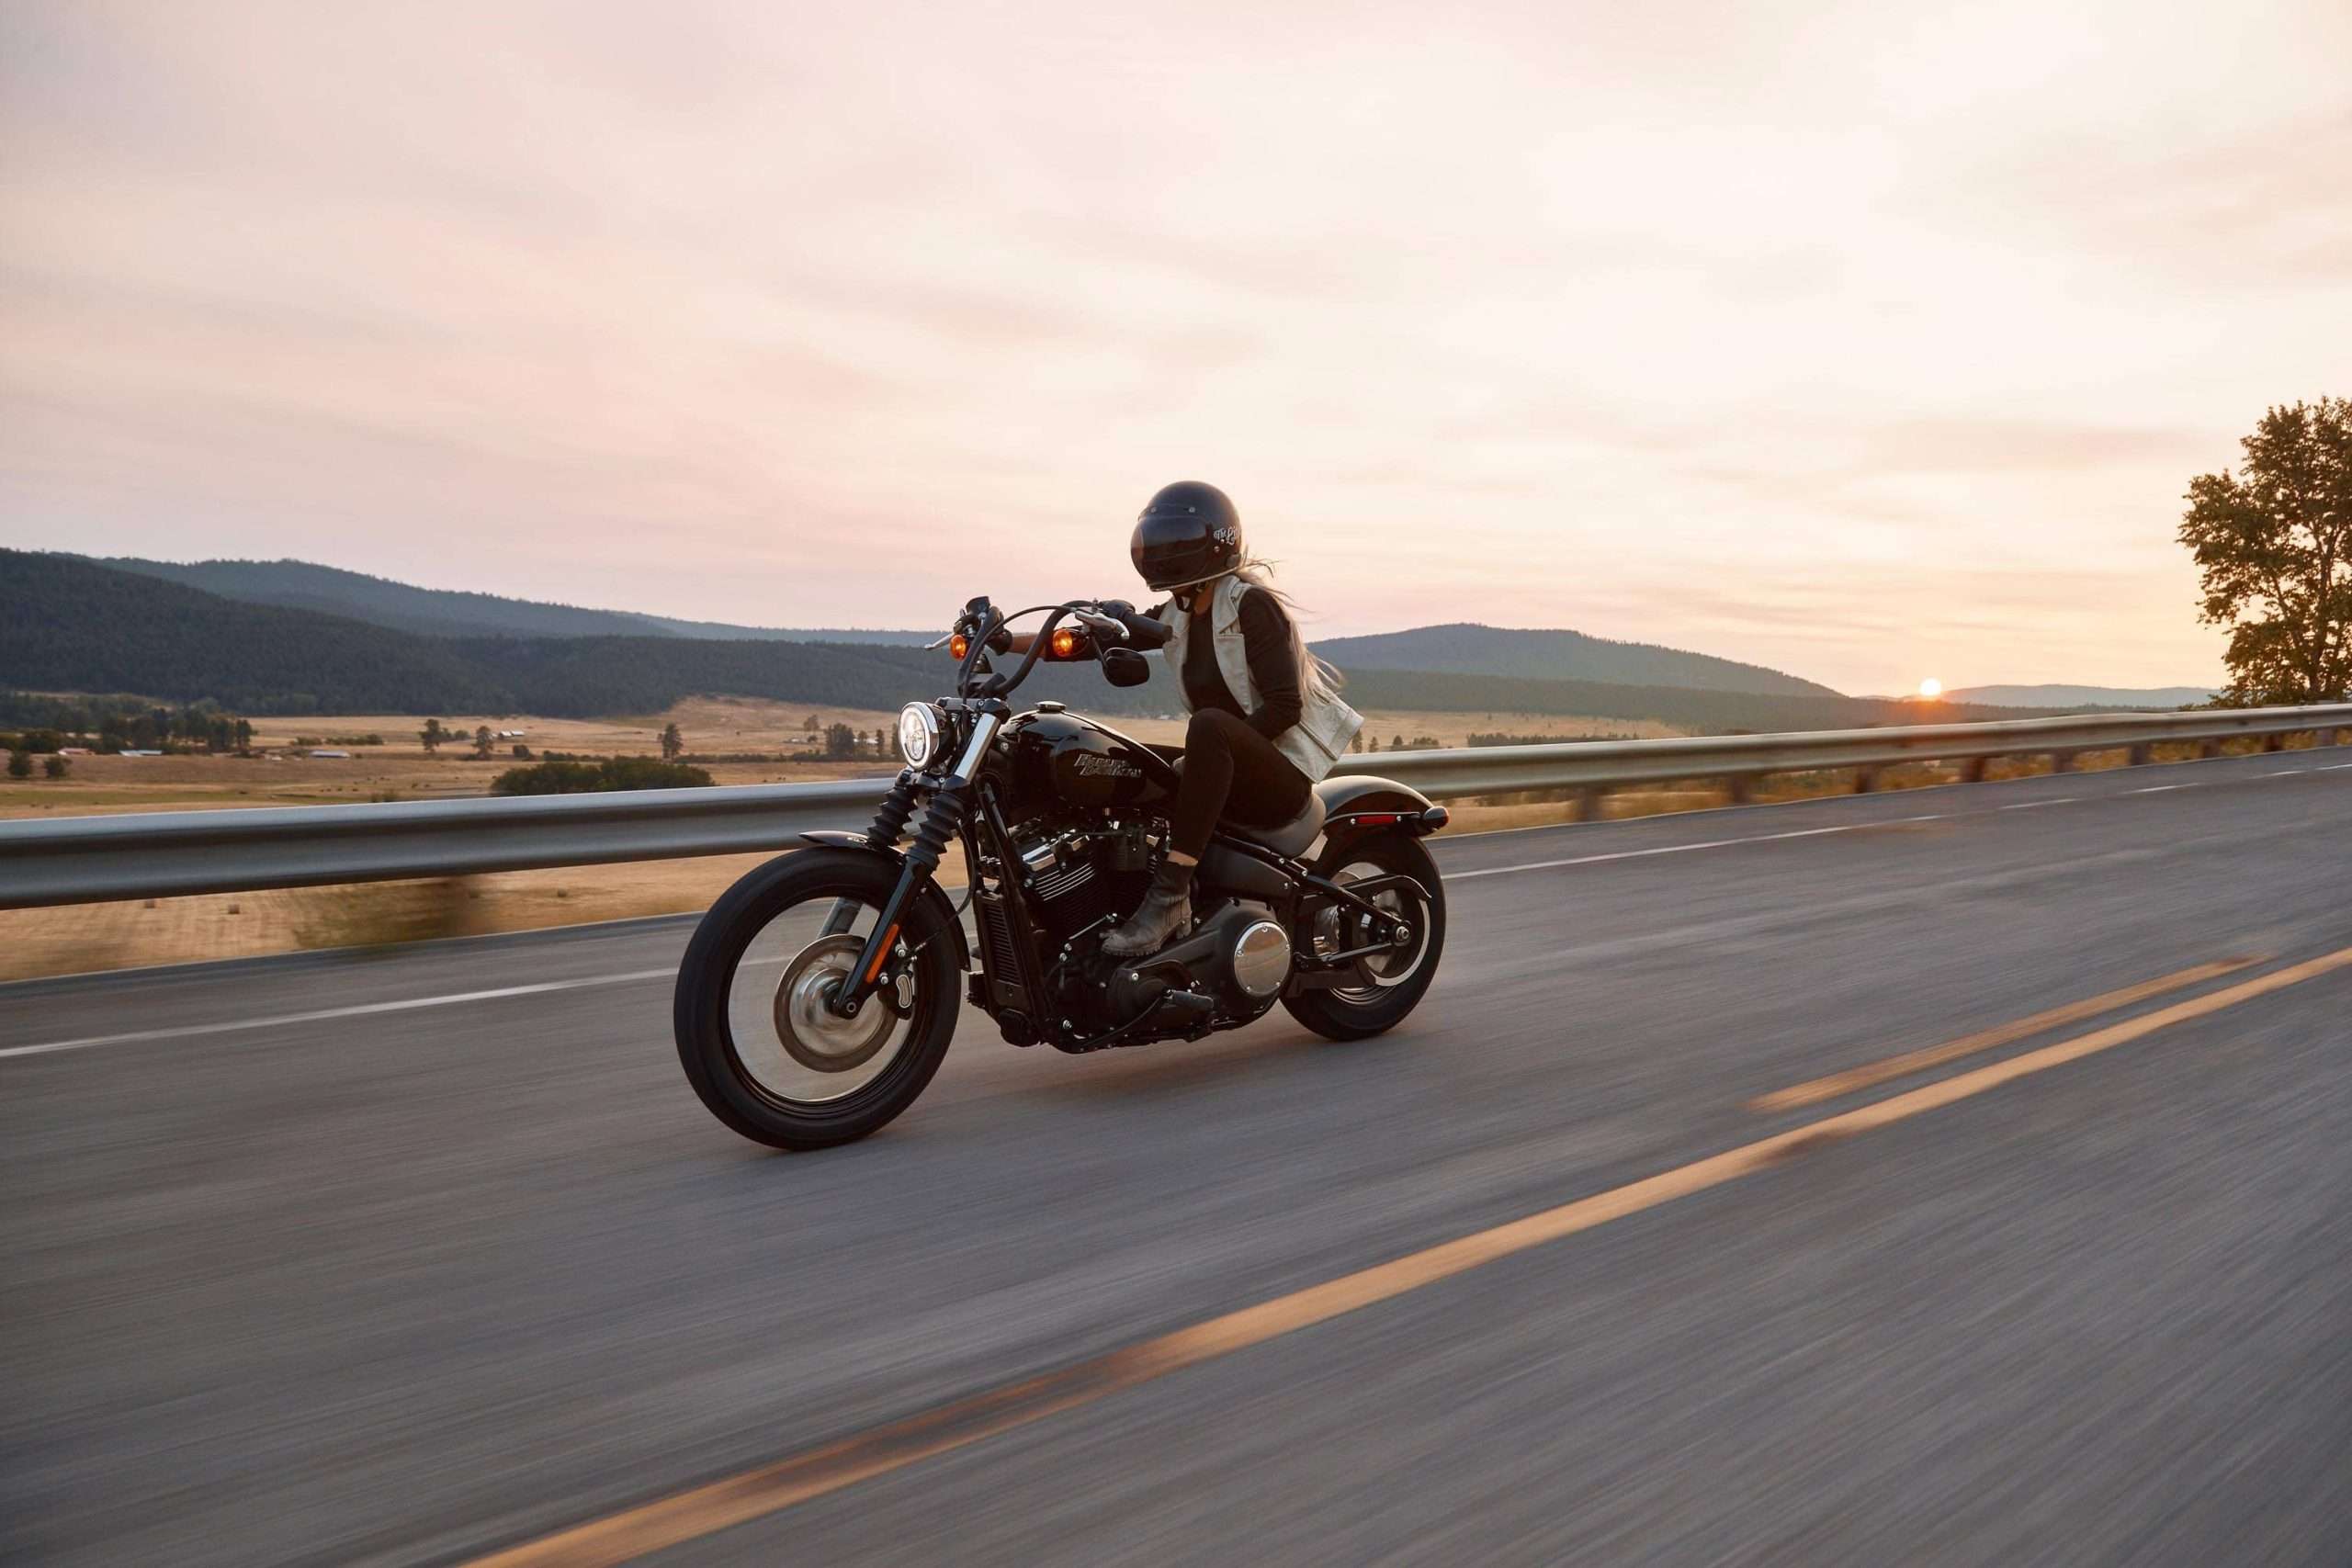 What Motorcycle Gear Should You Wear When Riding?